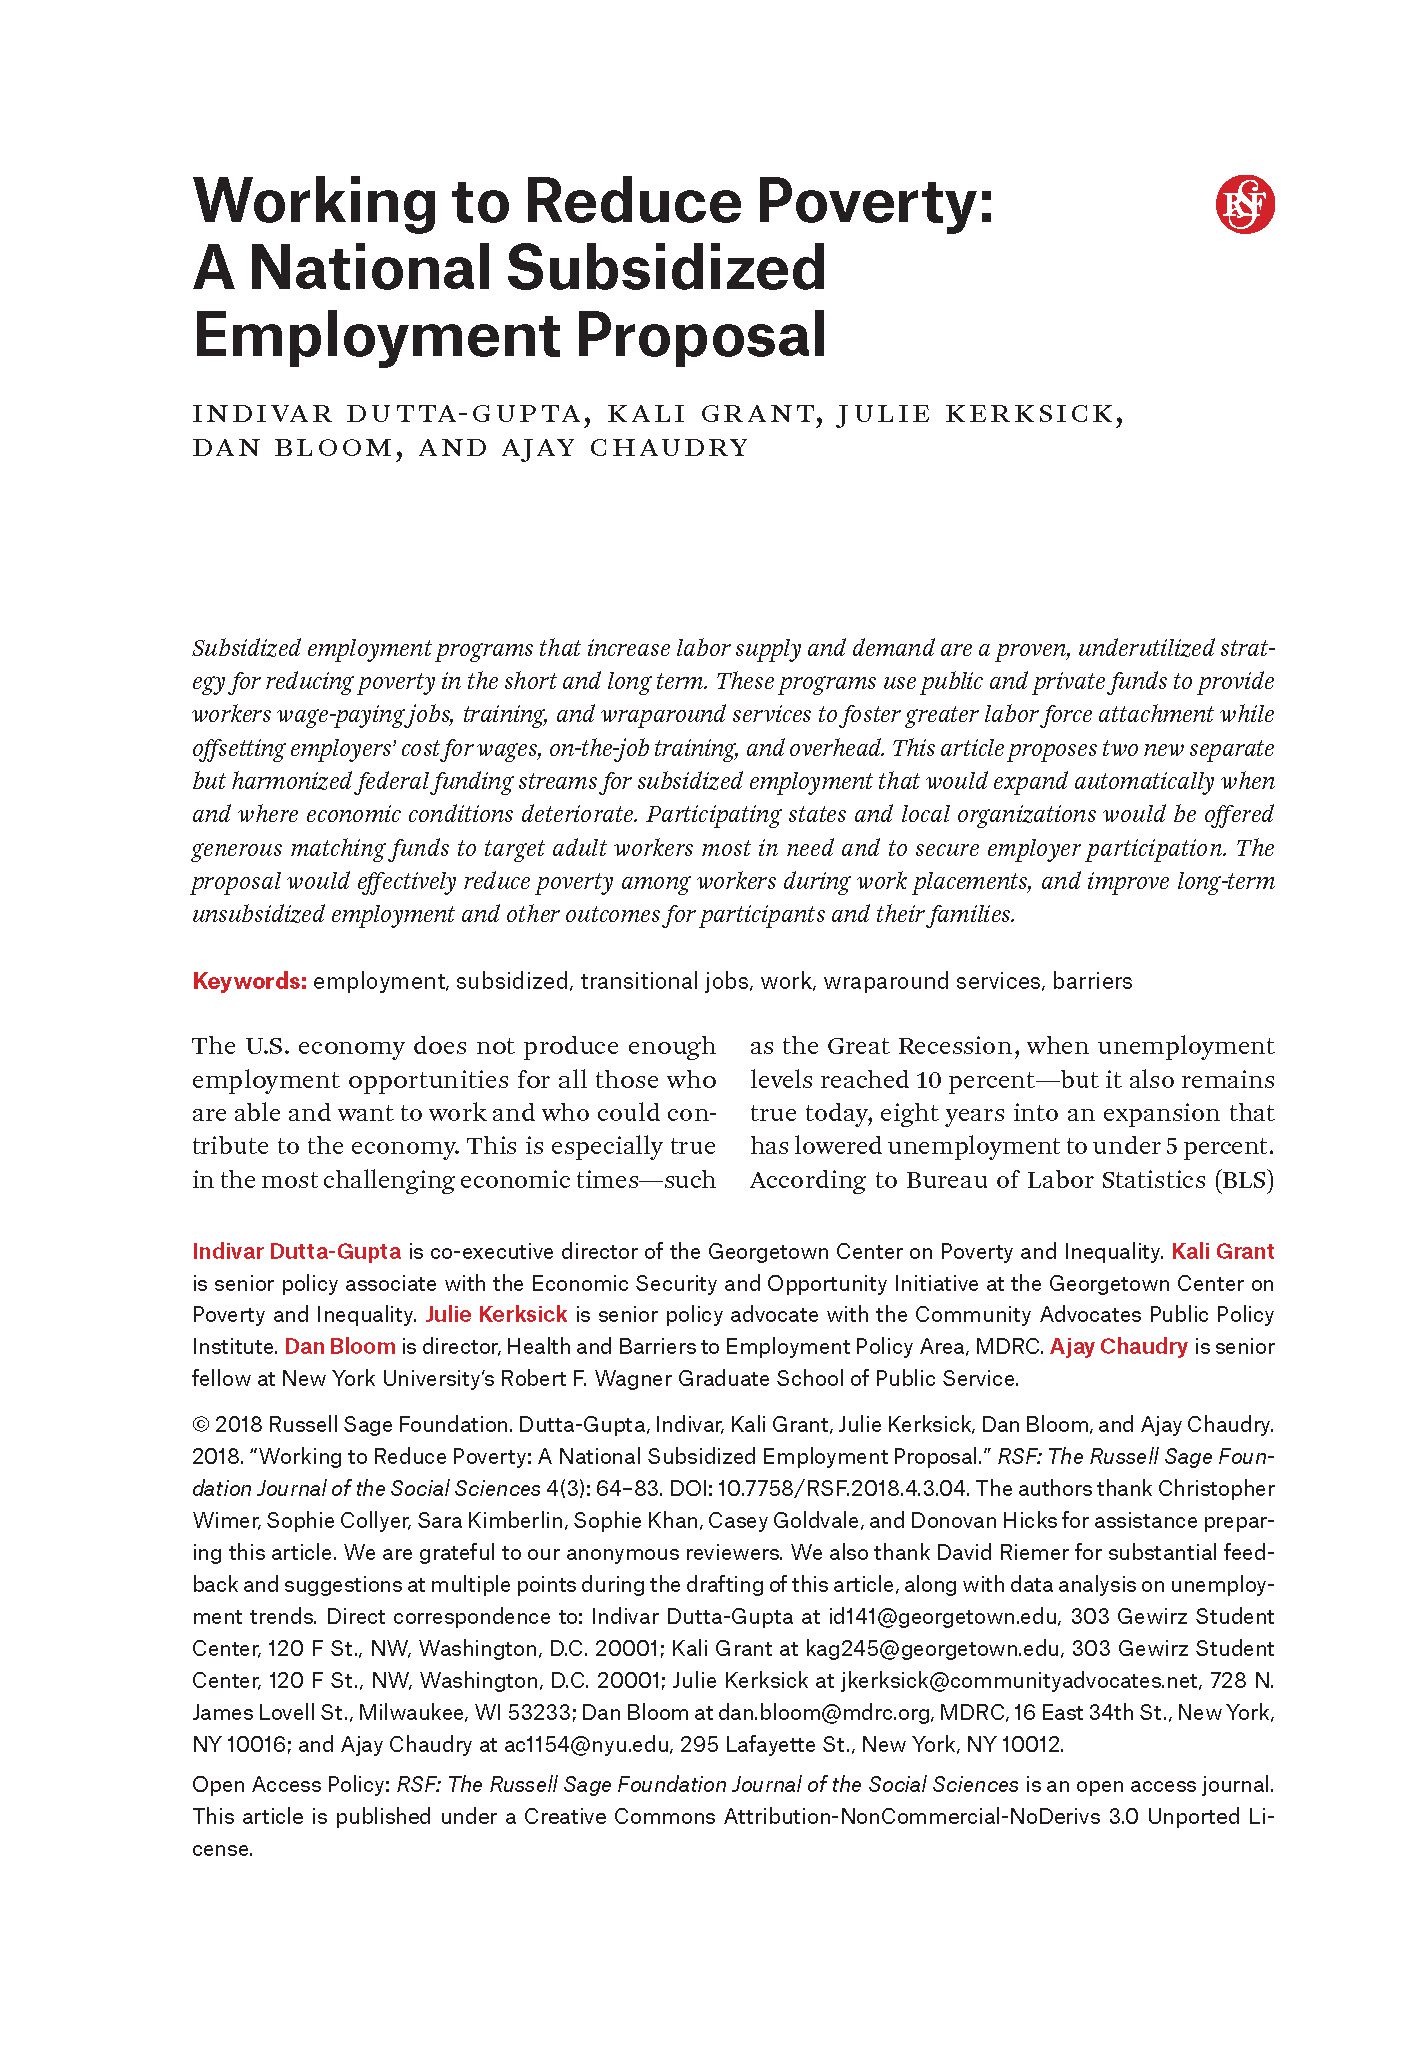 Working to Reduce Poverty: A National Subsidized Employment Proposal